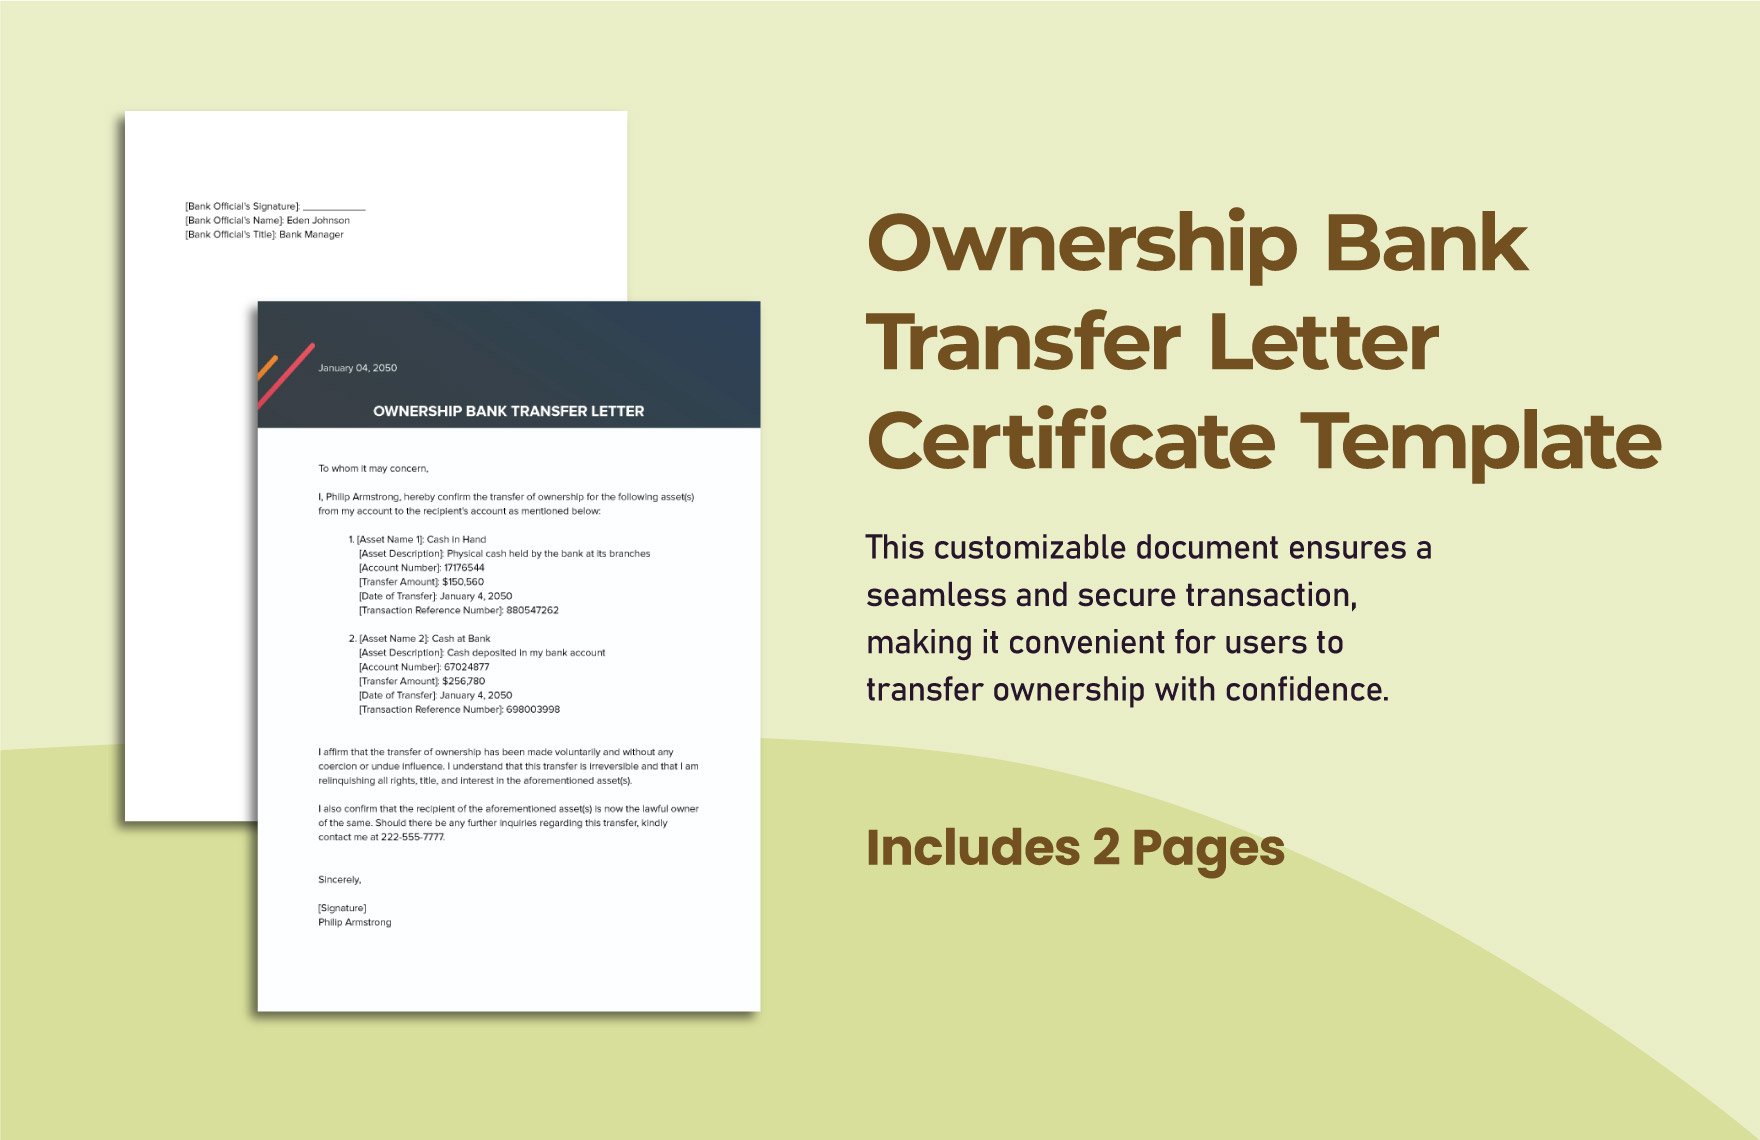 Free Ownership Bank Transfer Letter Certificate Template in Word, Google Docs, PDF